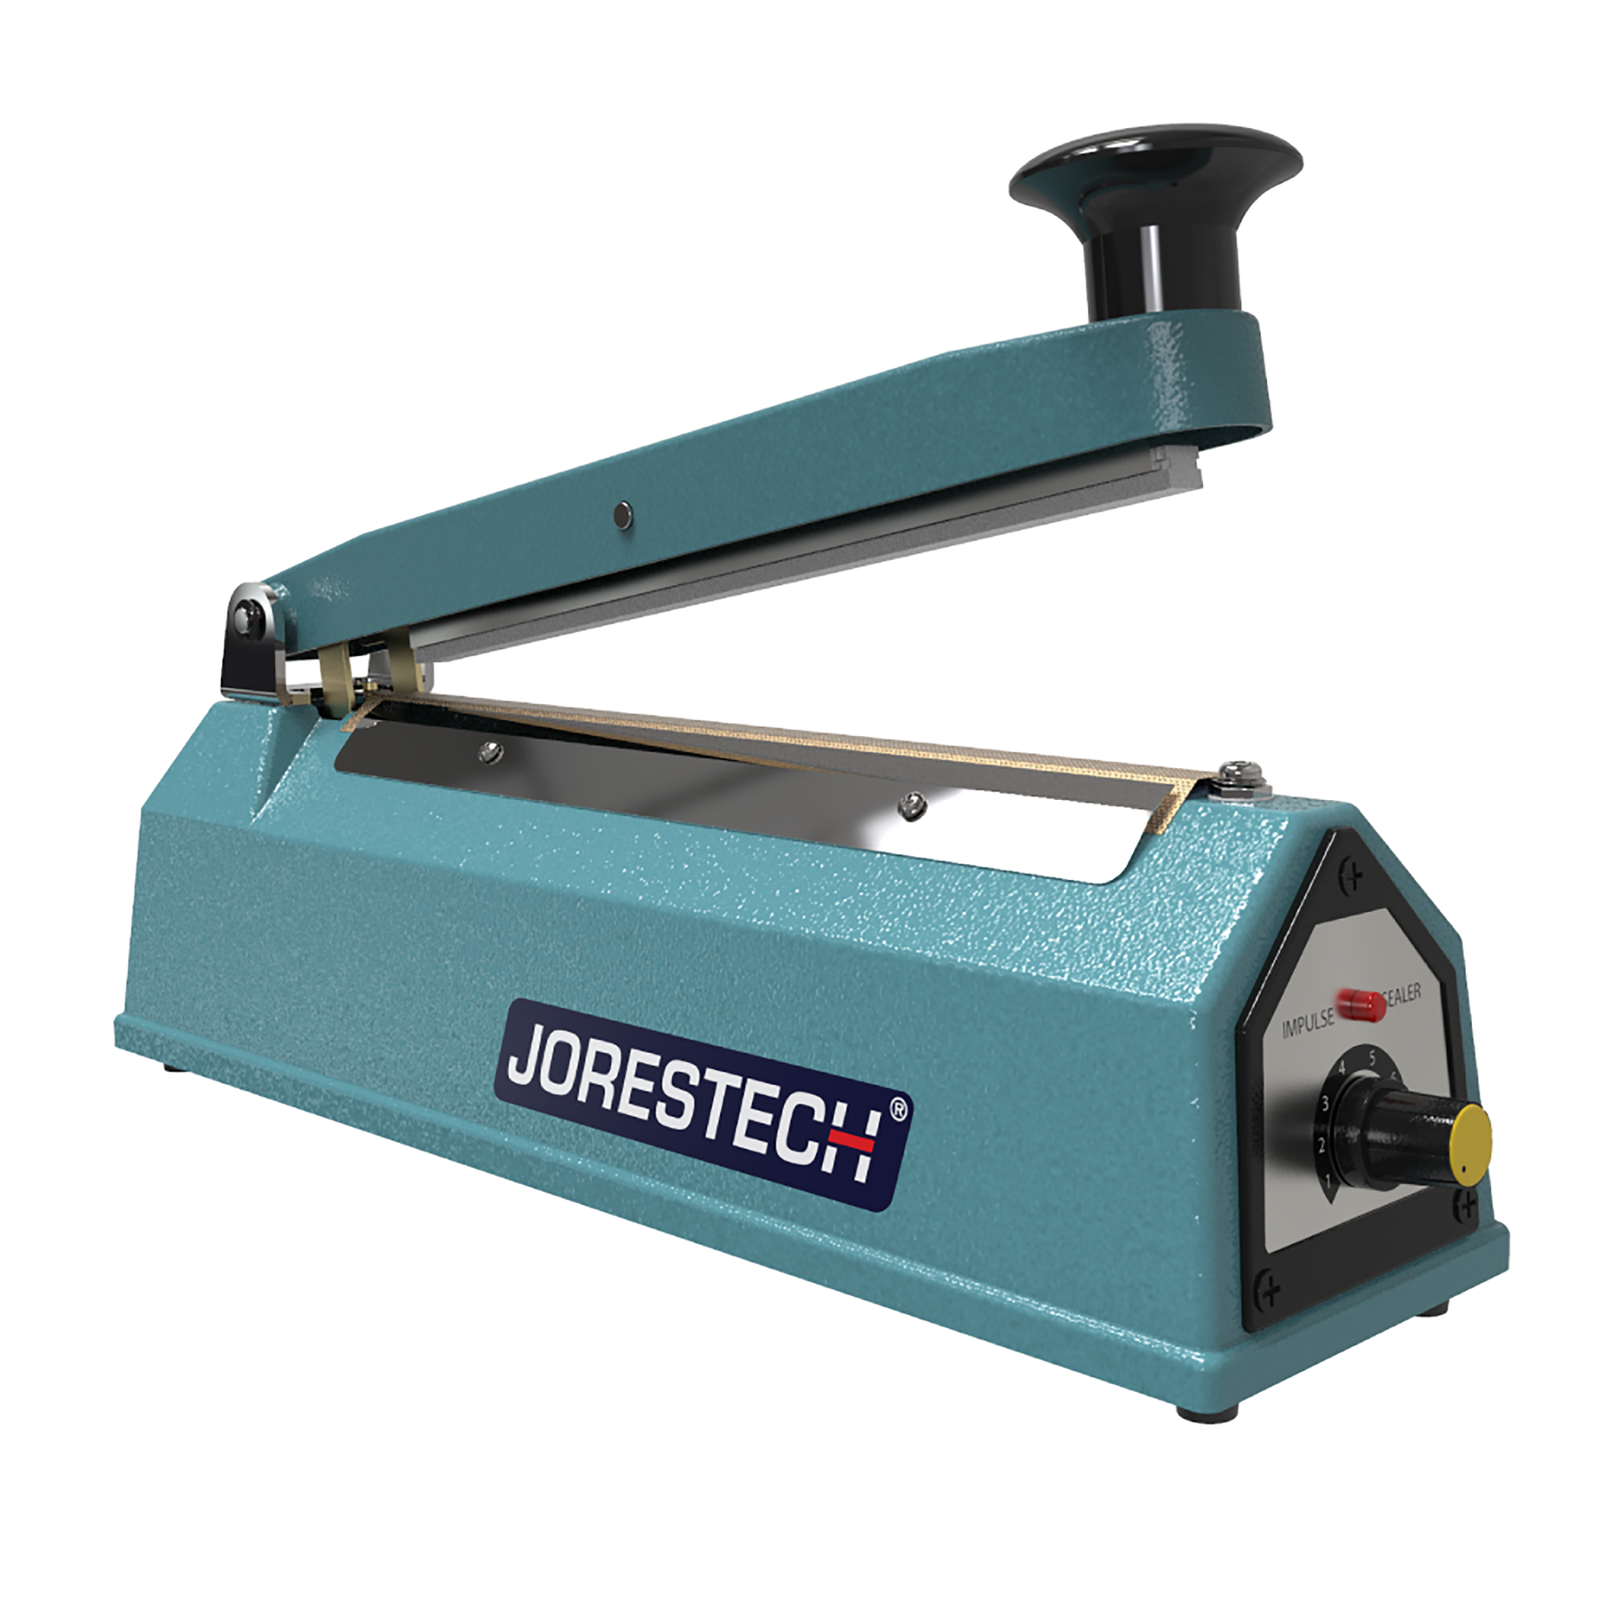 Glue Gun Kit with Stand and LED Light by JORESTECH by JORES Technologies